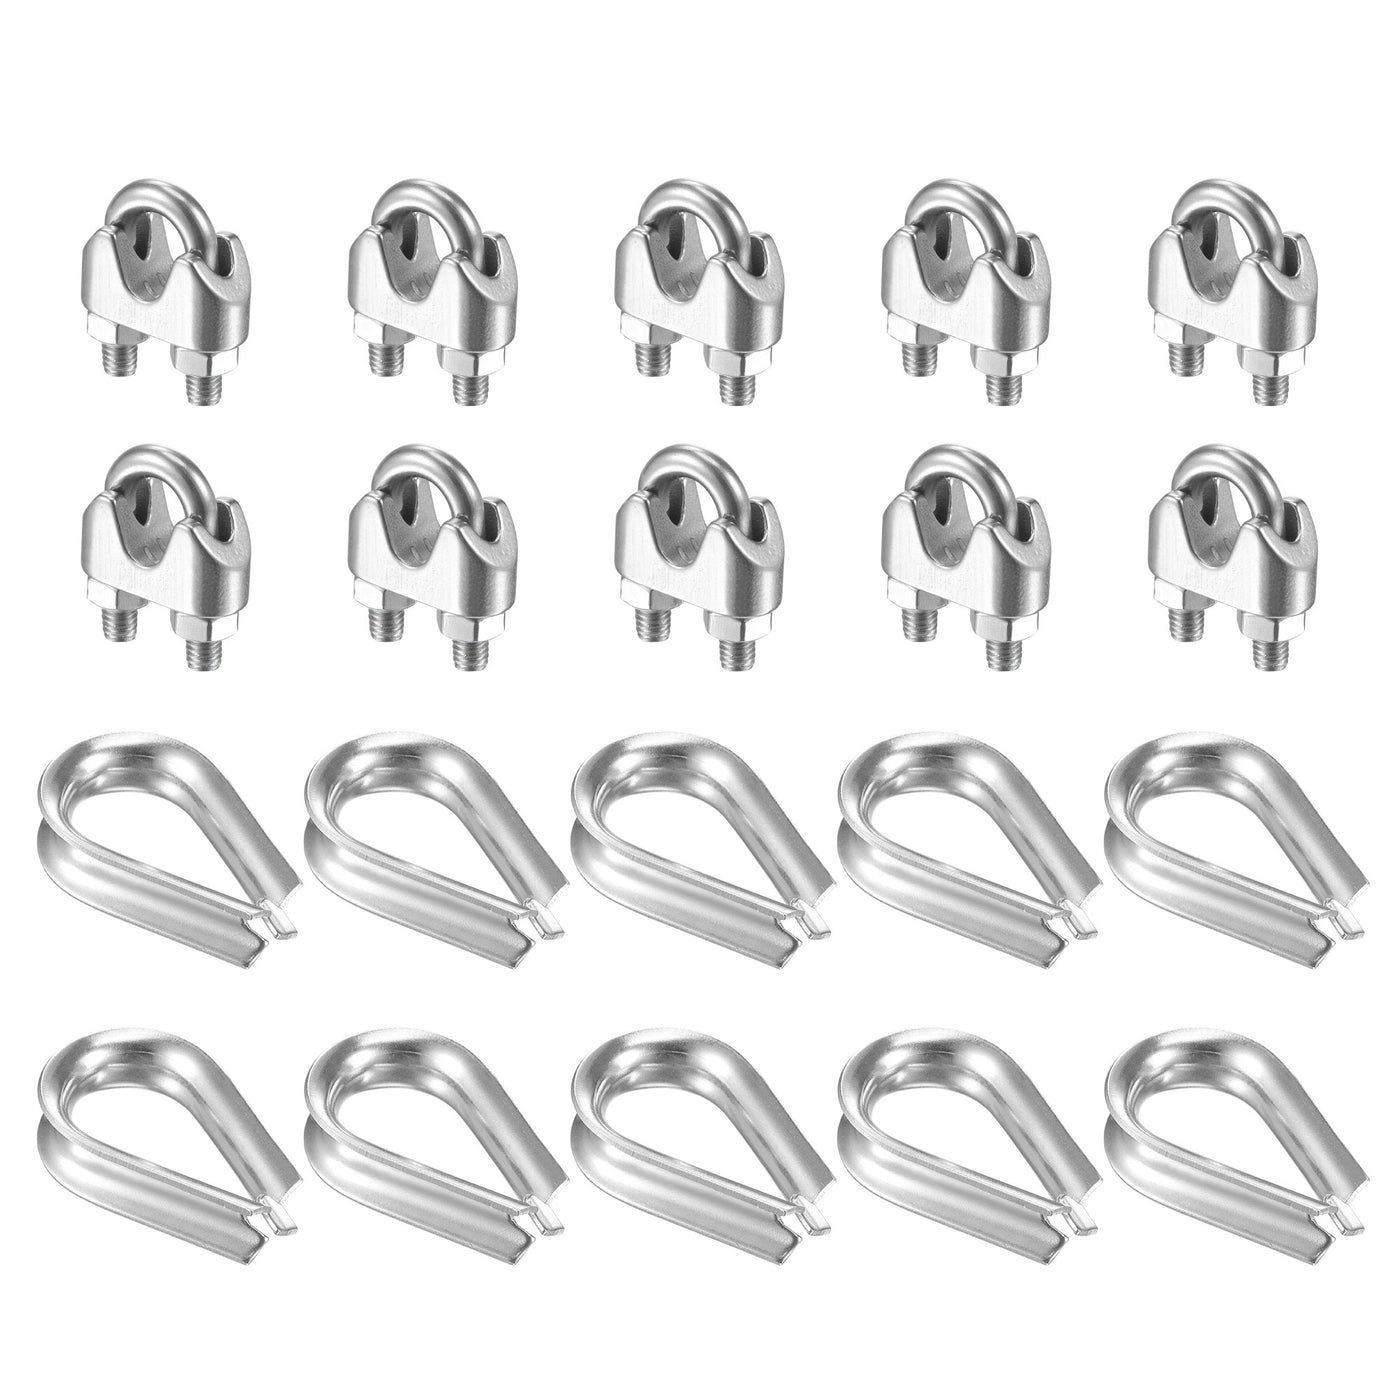 uxcell Uxcell Wire Rope Cable Clip Kit for M8, Included Rope Clamp 10Pcs and Thimble Rigging 10Pcs, 304 Stainless Steel U Bolt Saddle Fastener